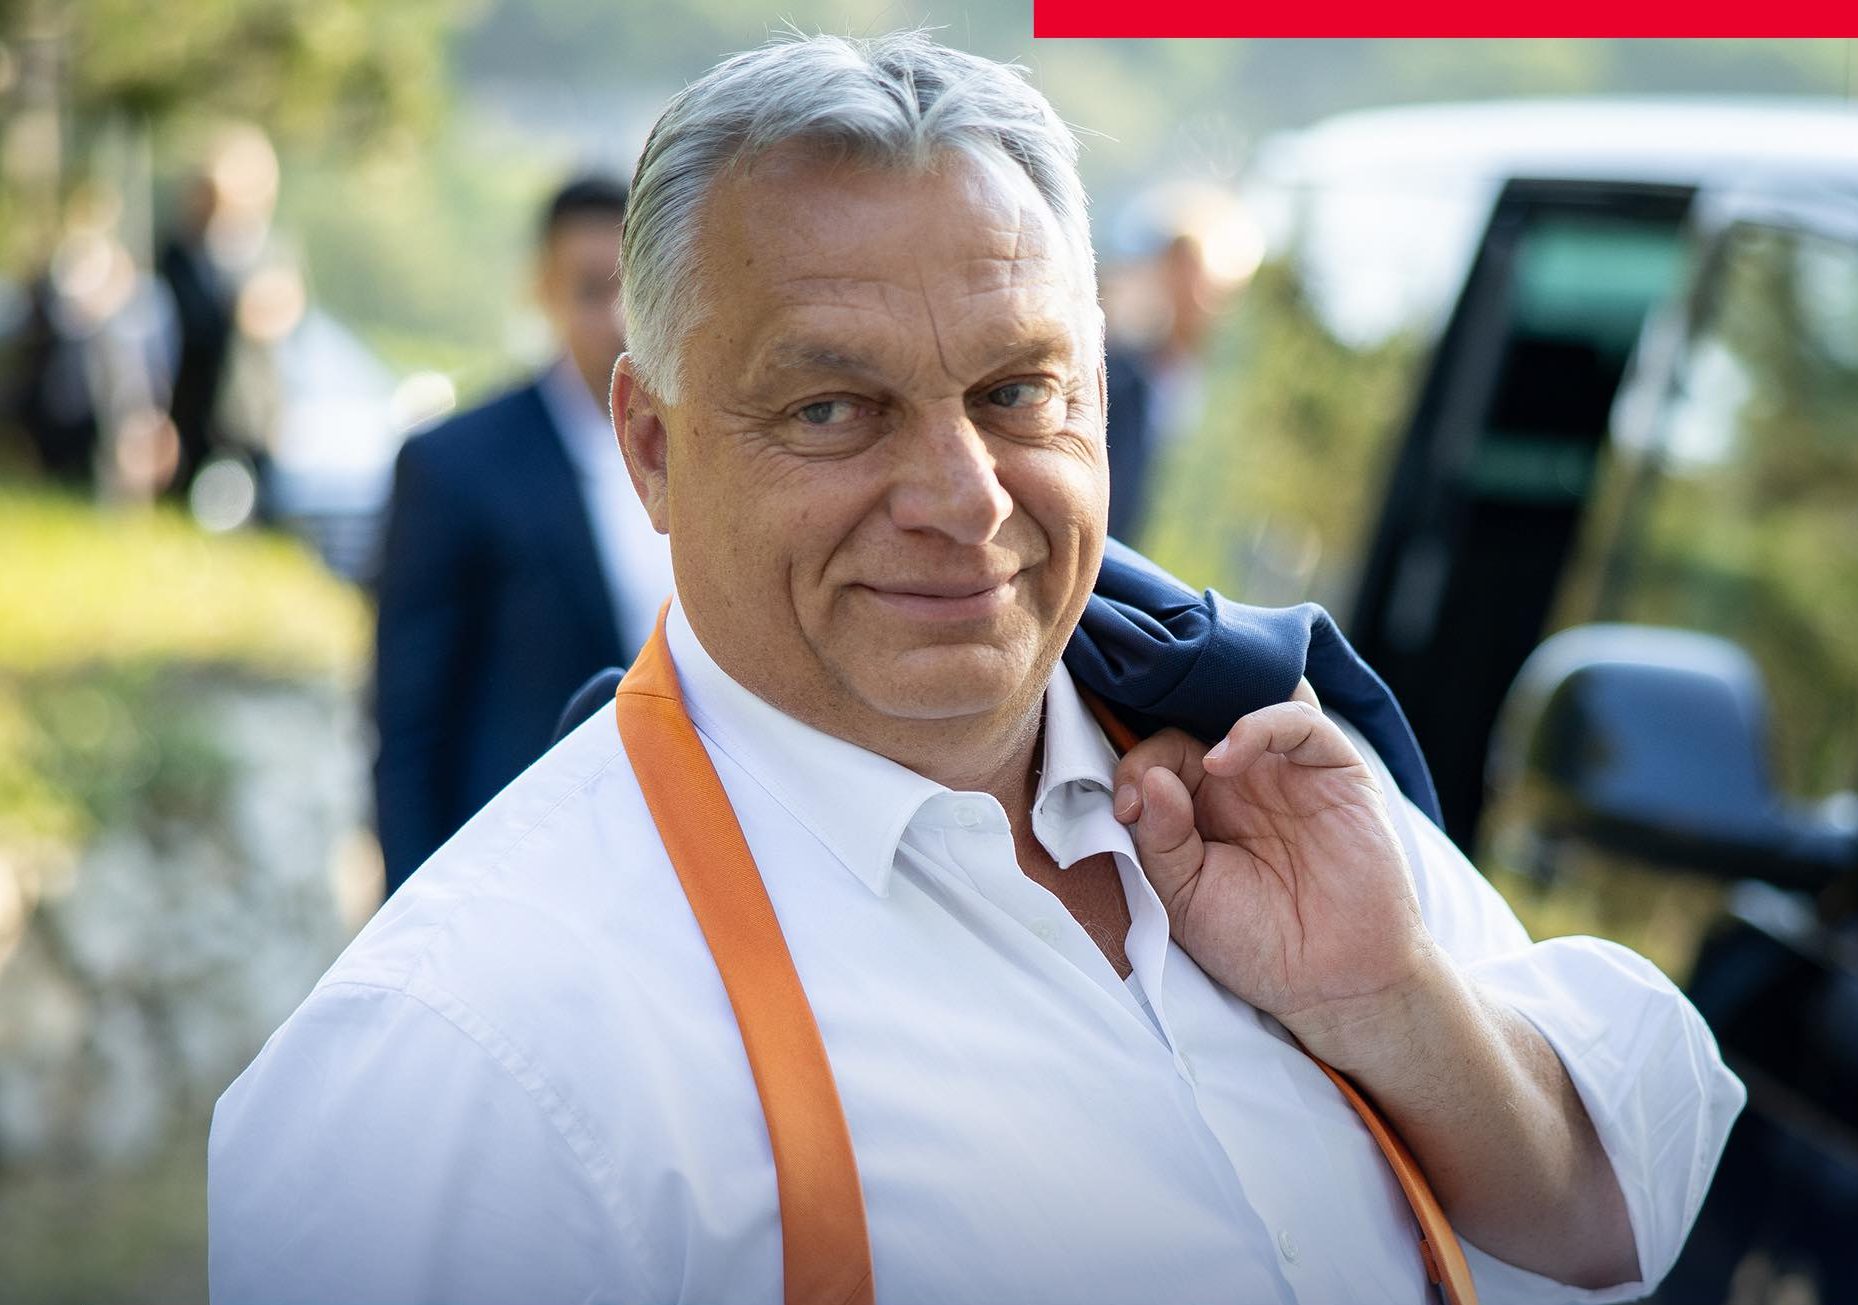 In Hungary Western-Style Governments Would Fall in Minutes, Viktor Orbán Claims